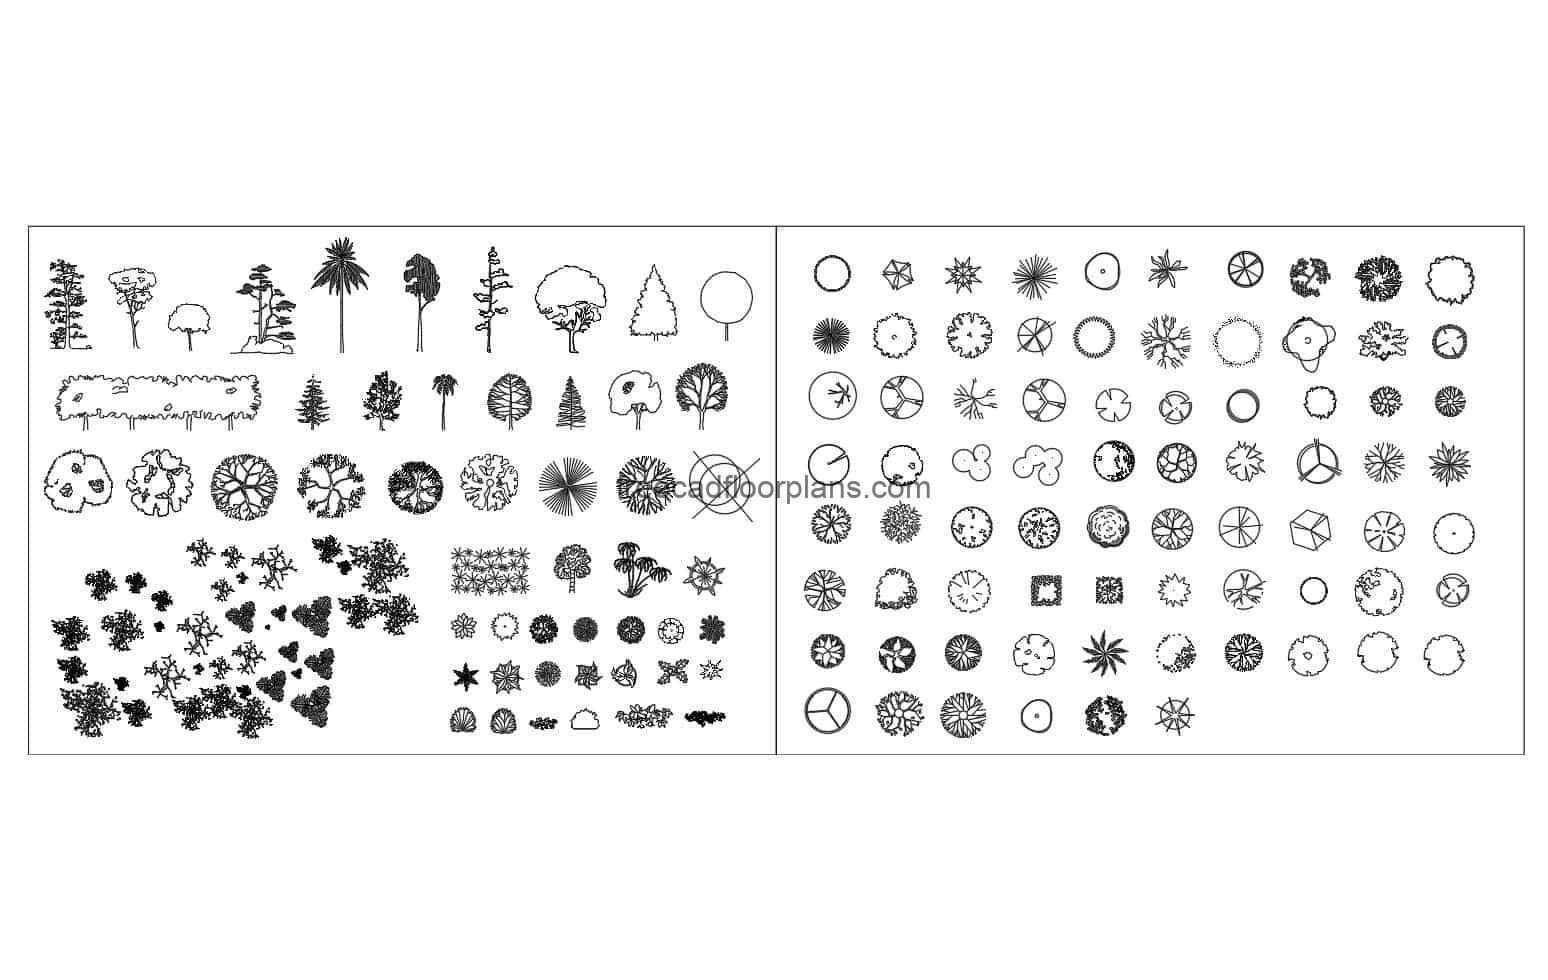 Complete collection of Trees and Plants in Autocad DWG blocks for free download